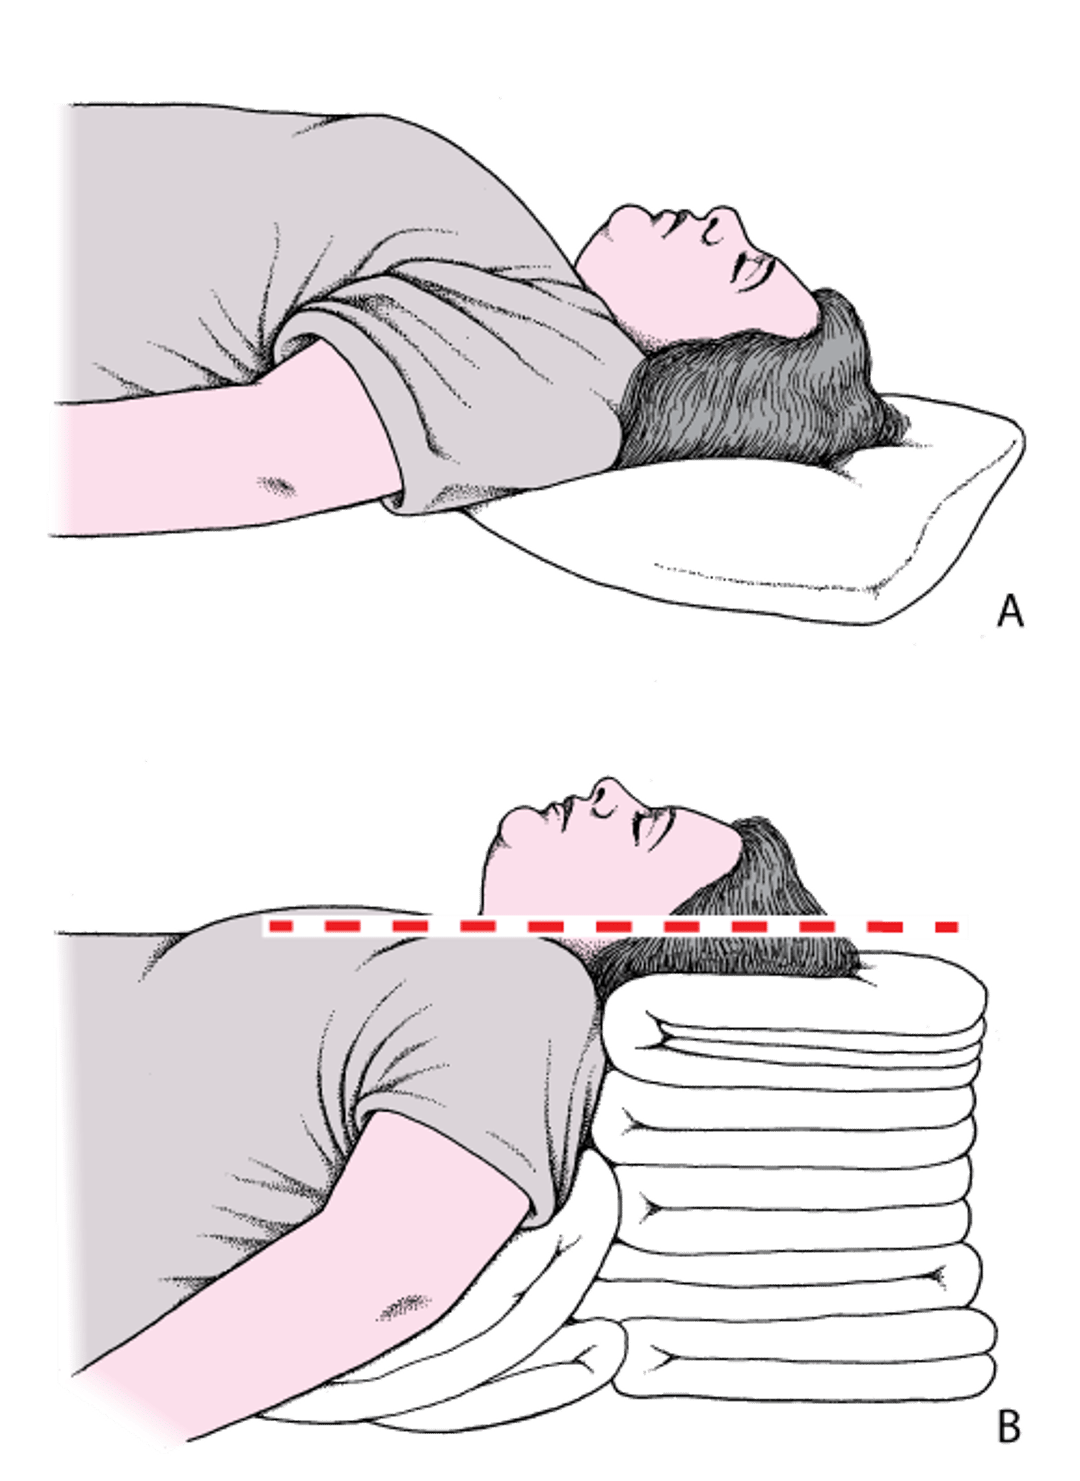 Head and neck positioning to open the airway: Sniffing position